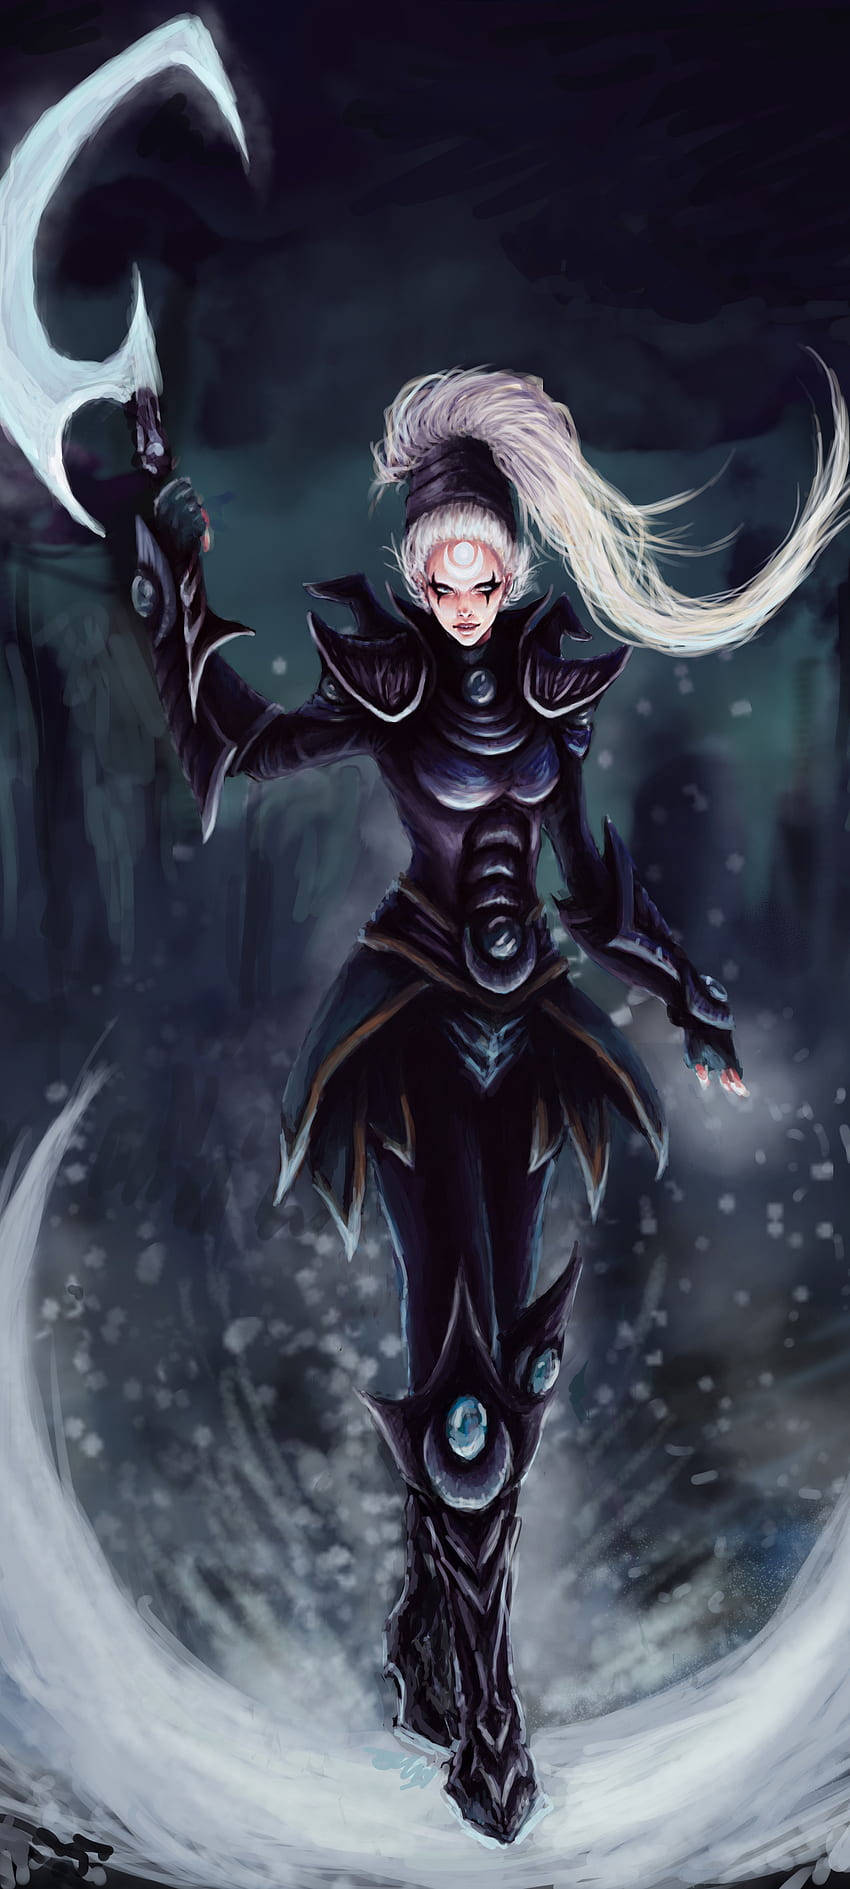 League Of Legends iPhone Diana temabaggrund. Wallpaper